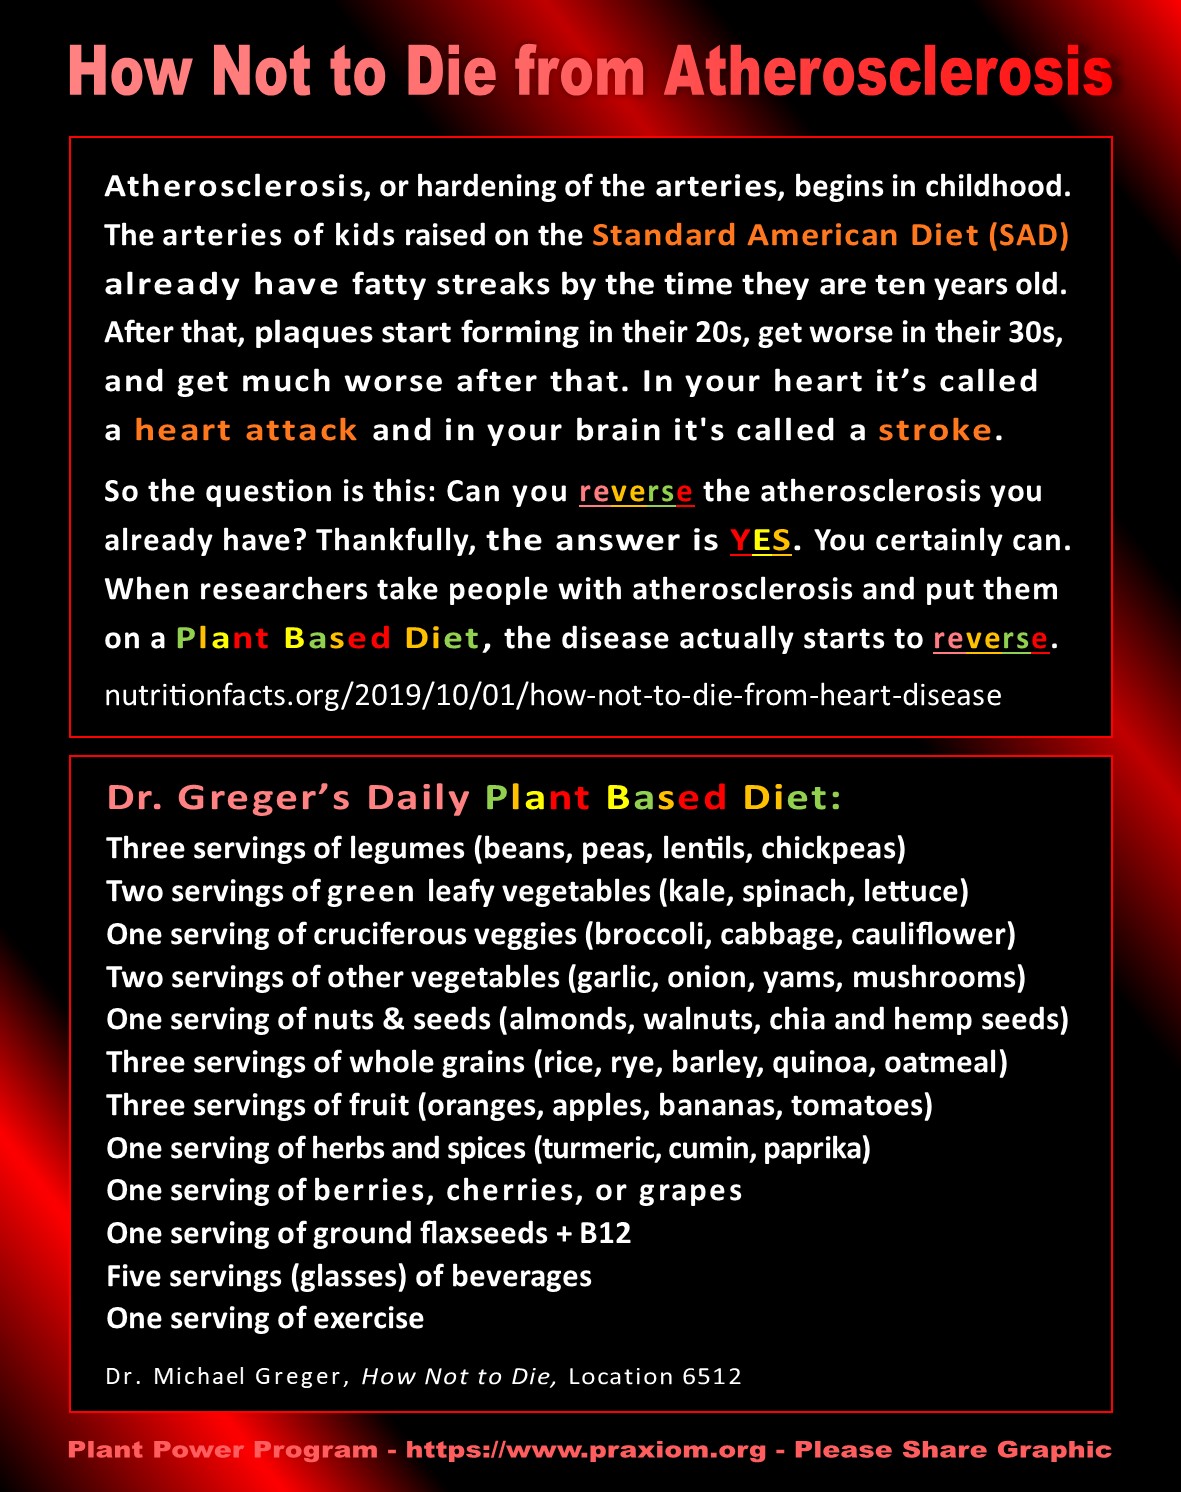 How Not to Die From Atherosclerosis - Dr. Michael Greger